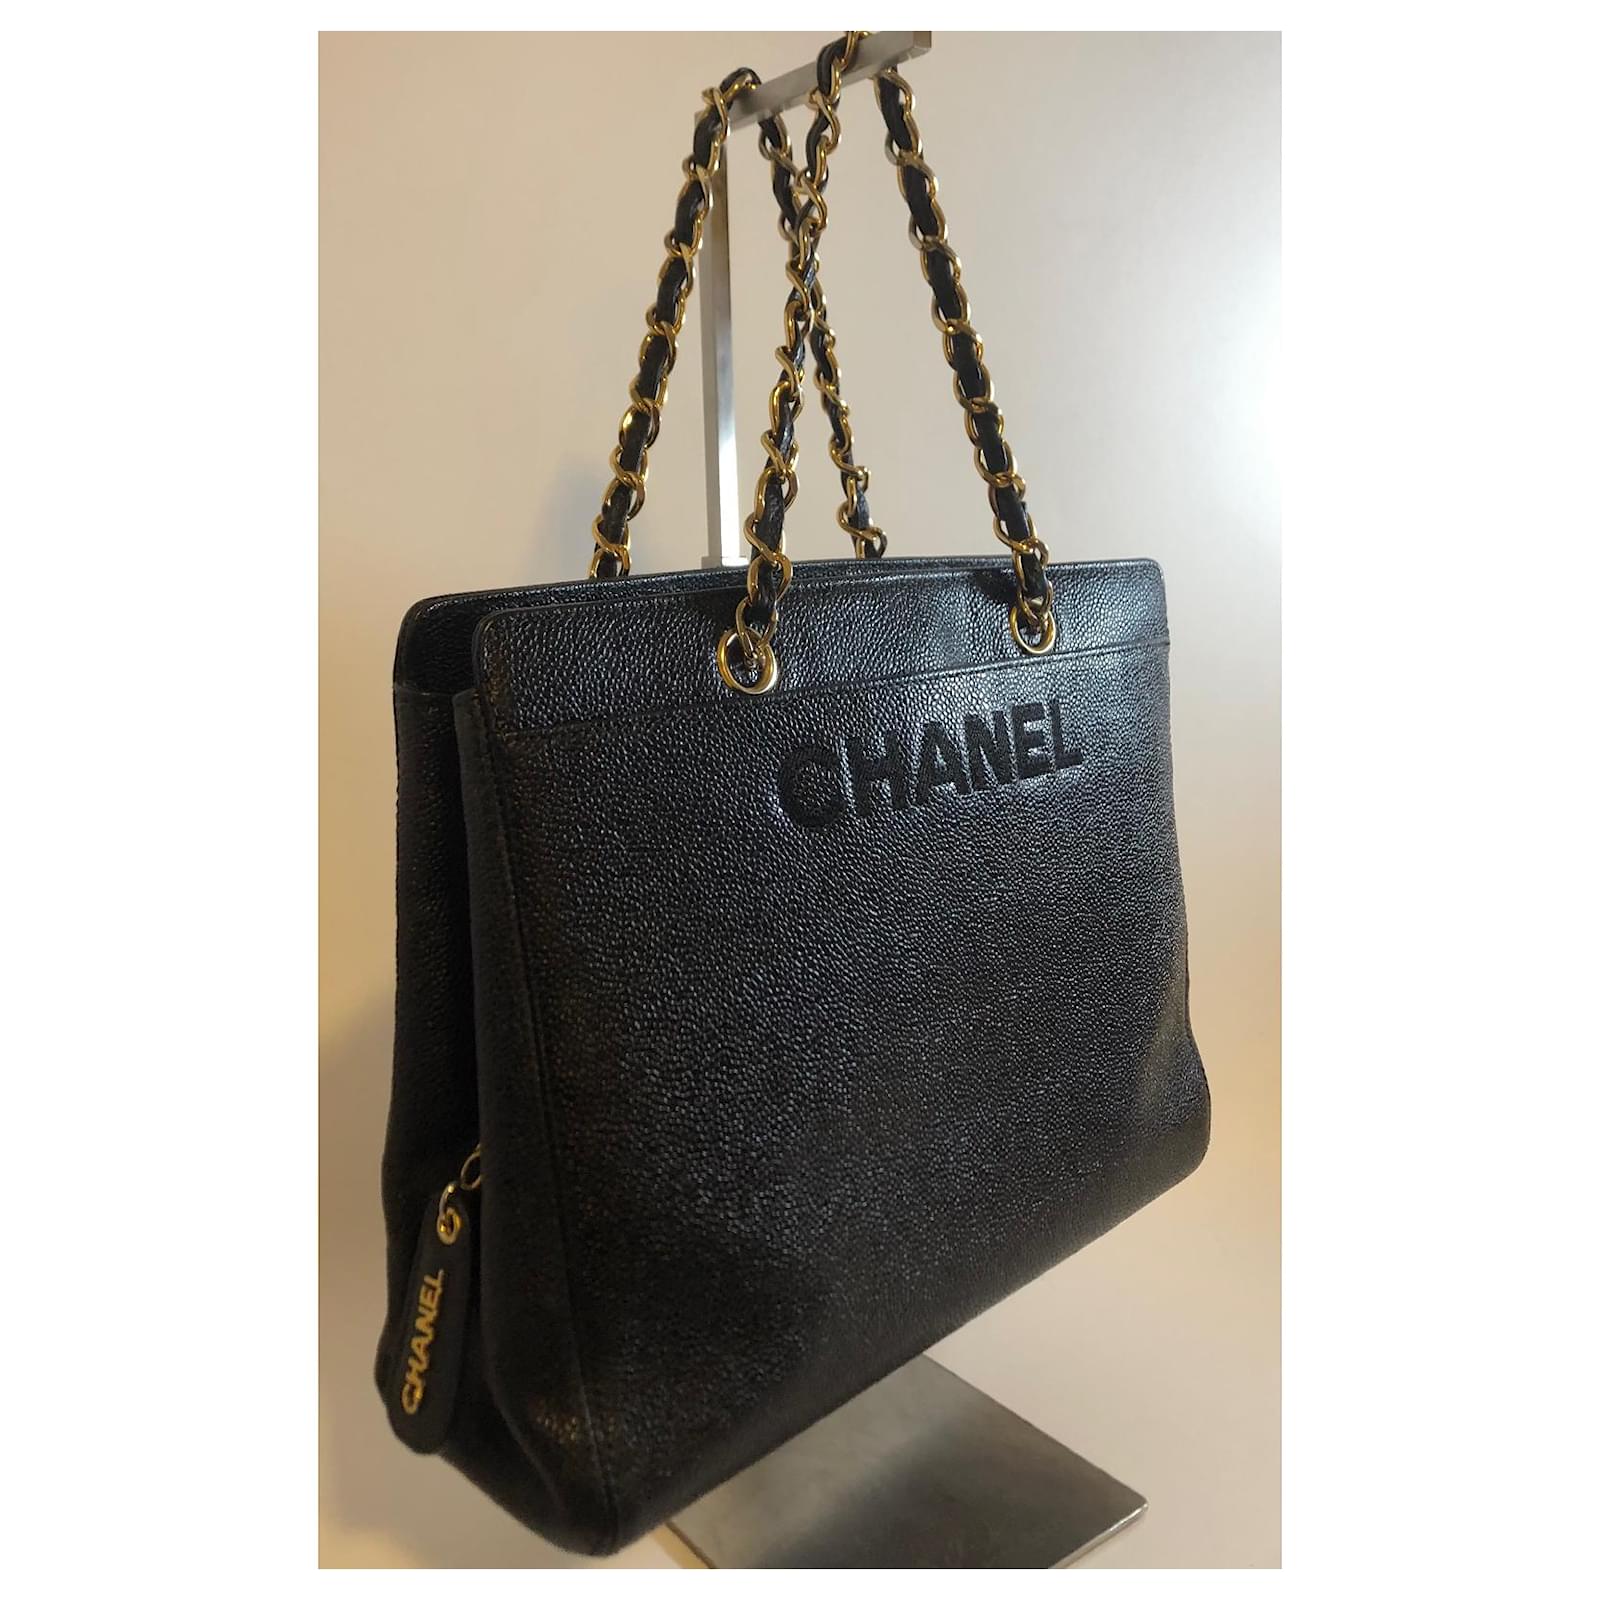 Chanel Classic Double Flap Bag with 24k gold plated hardware